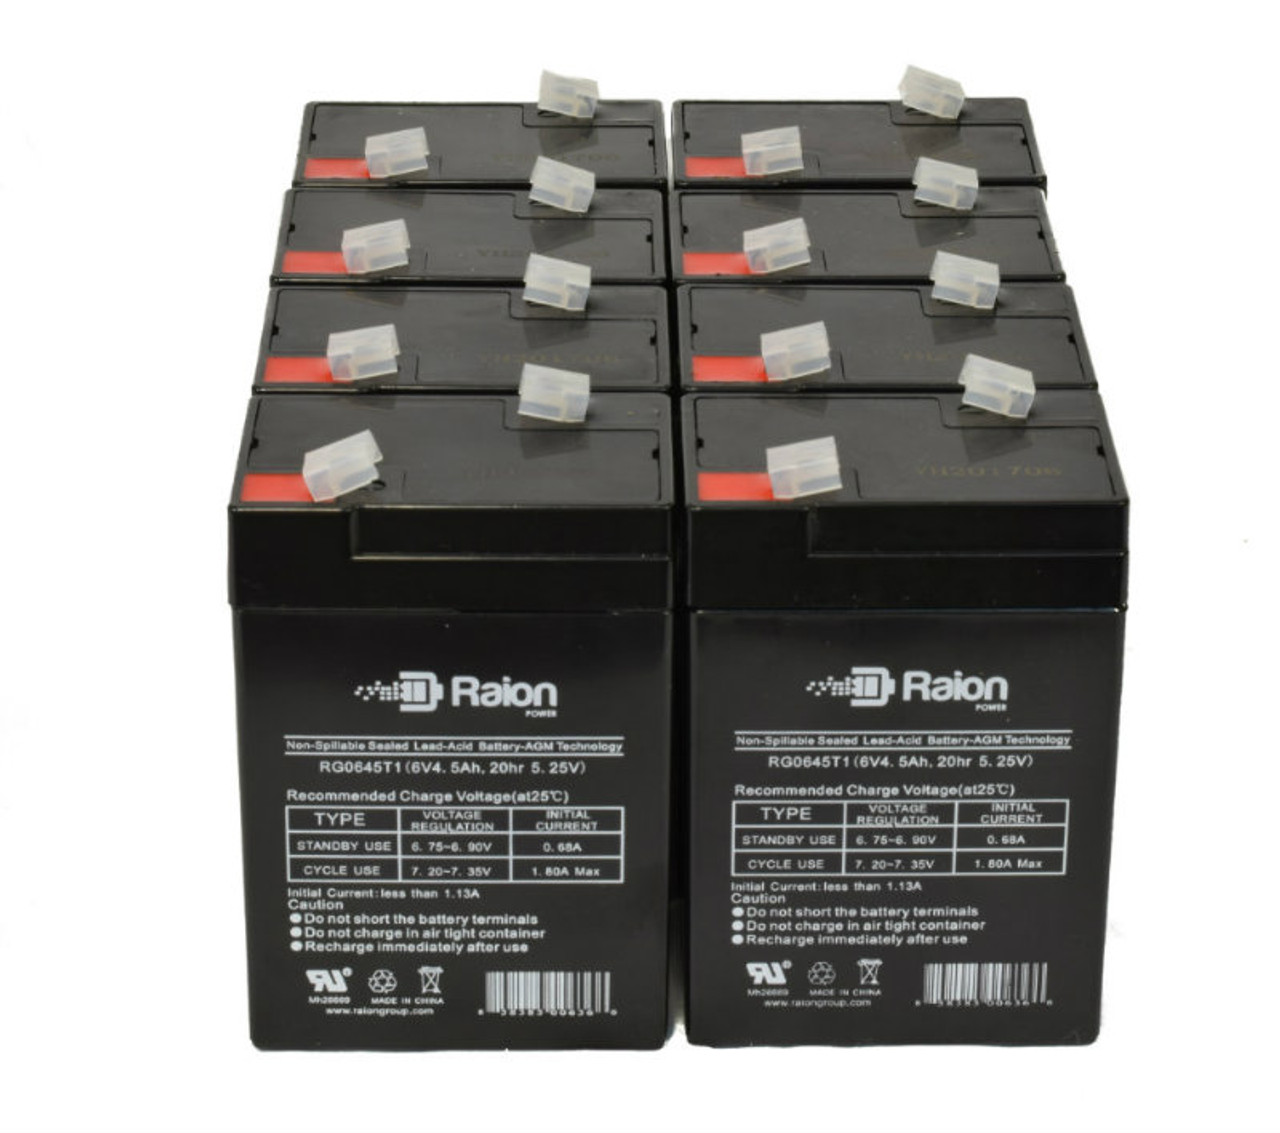 Raion Power 6V 4.5Ah Replacement Emergency Light Battery for National Power Corporation GS012PS - 8 Pack